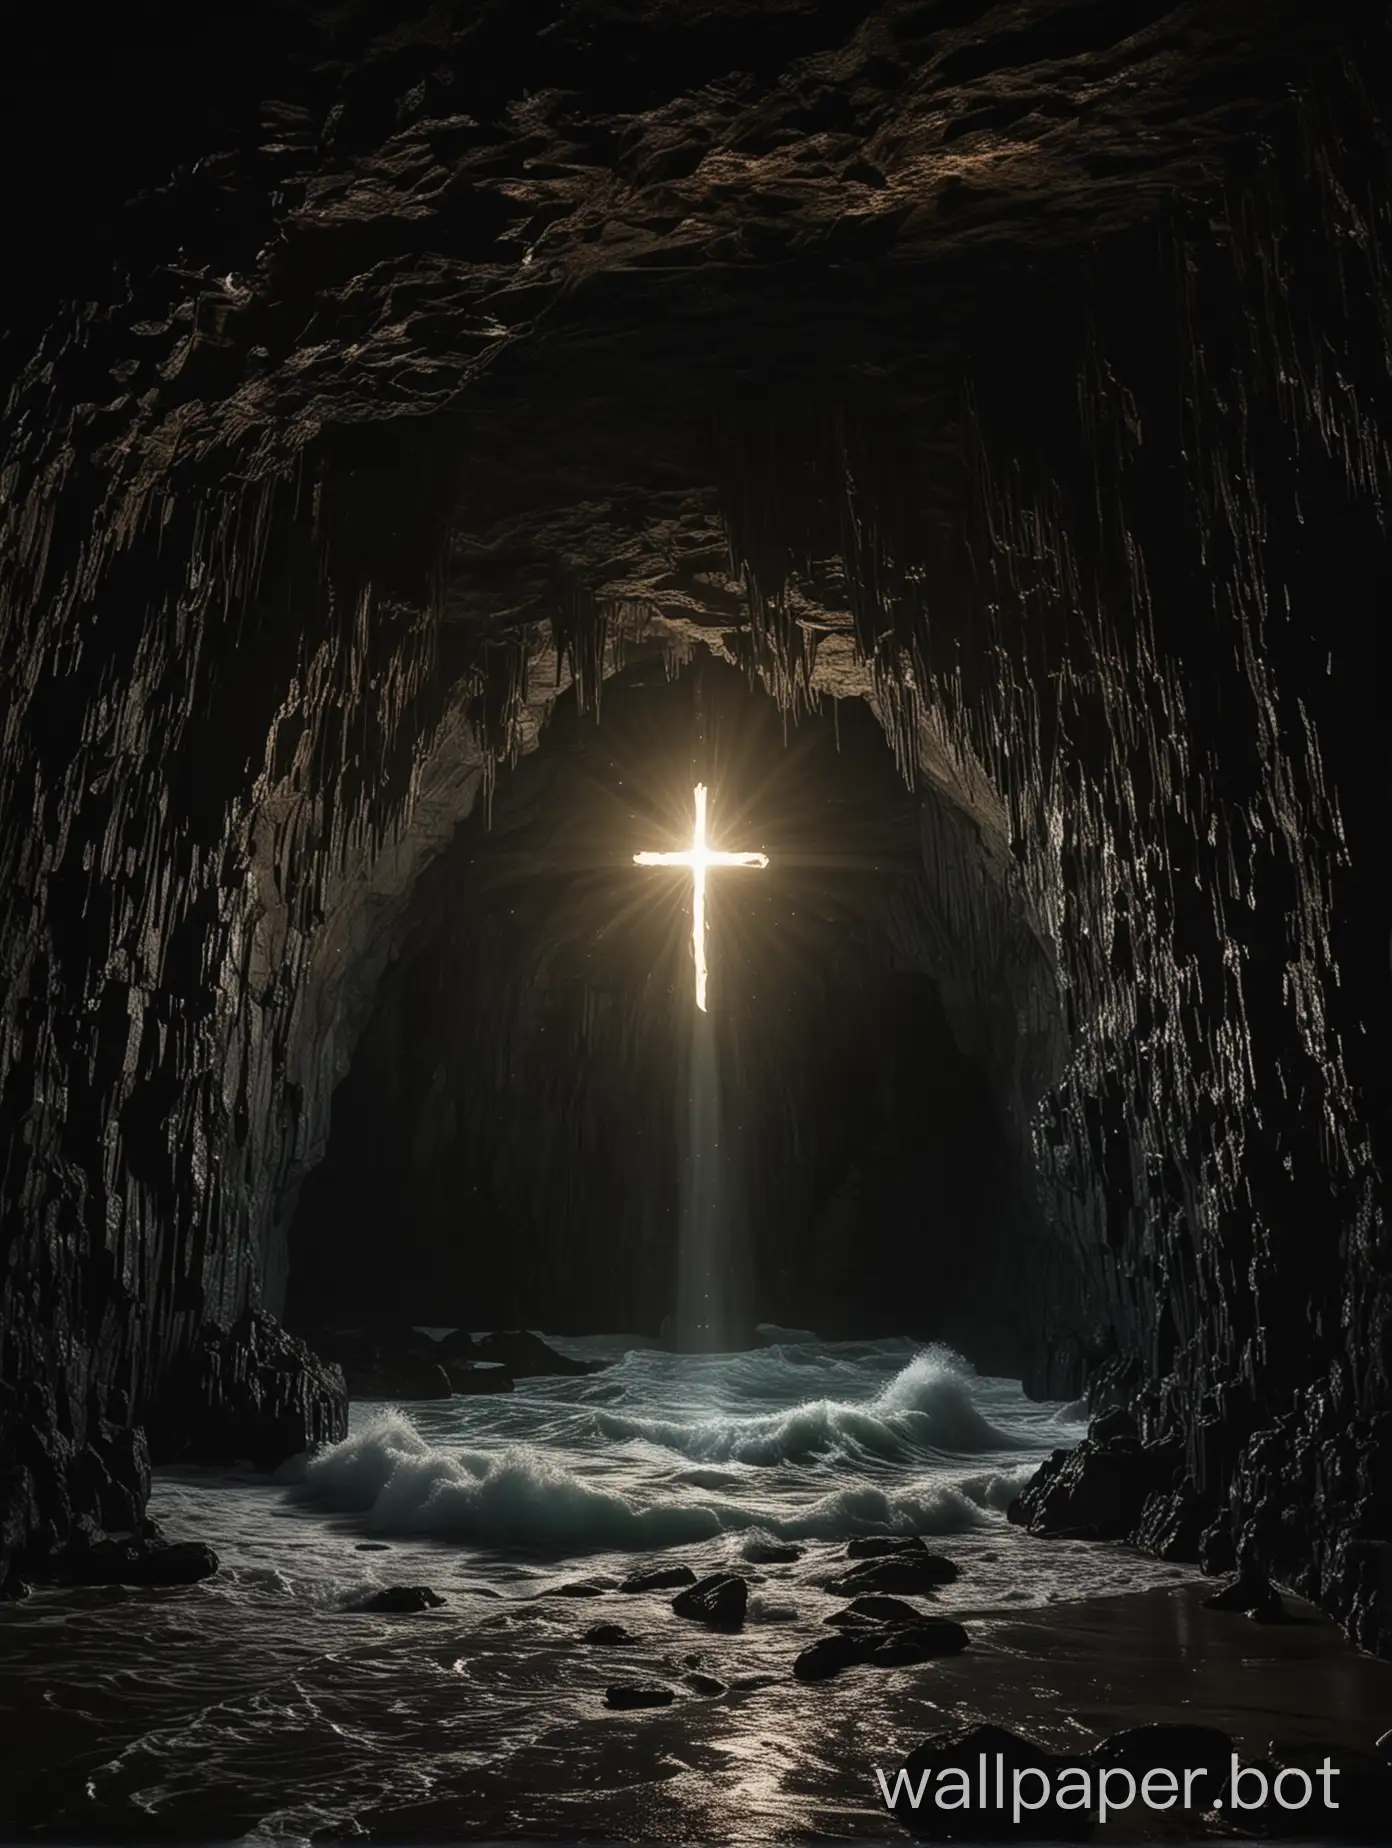 A dark cave with the echo of waves flowing in it and a glowing cross in the center